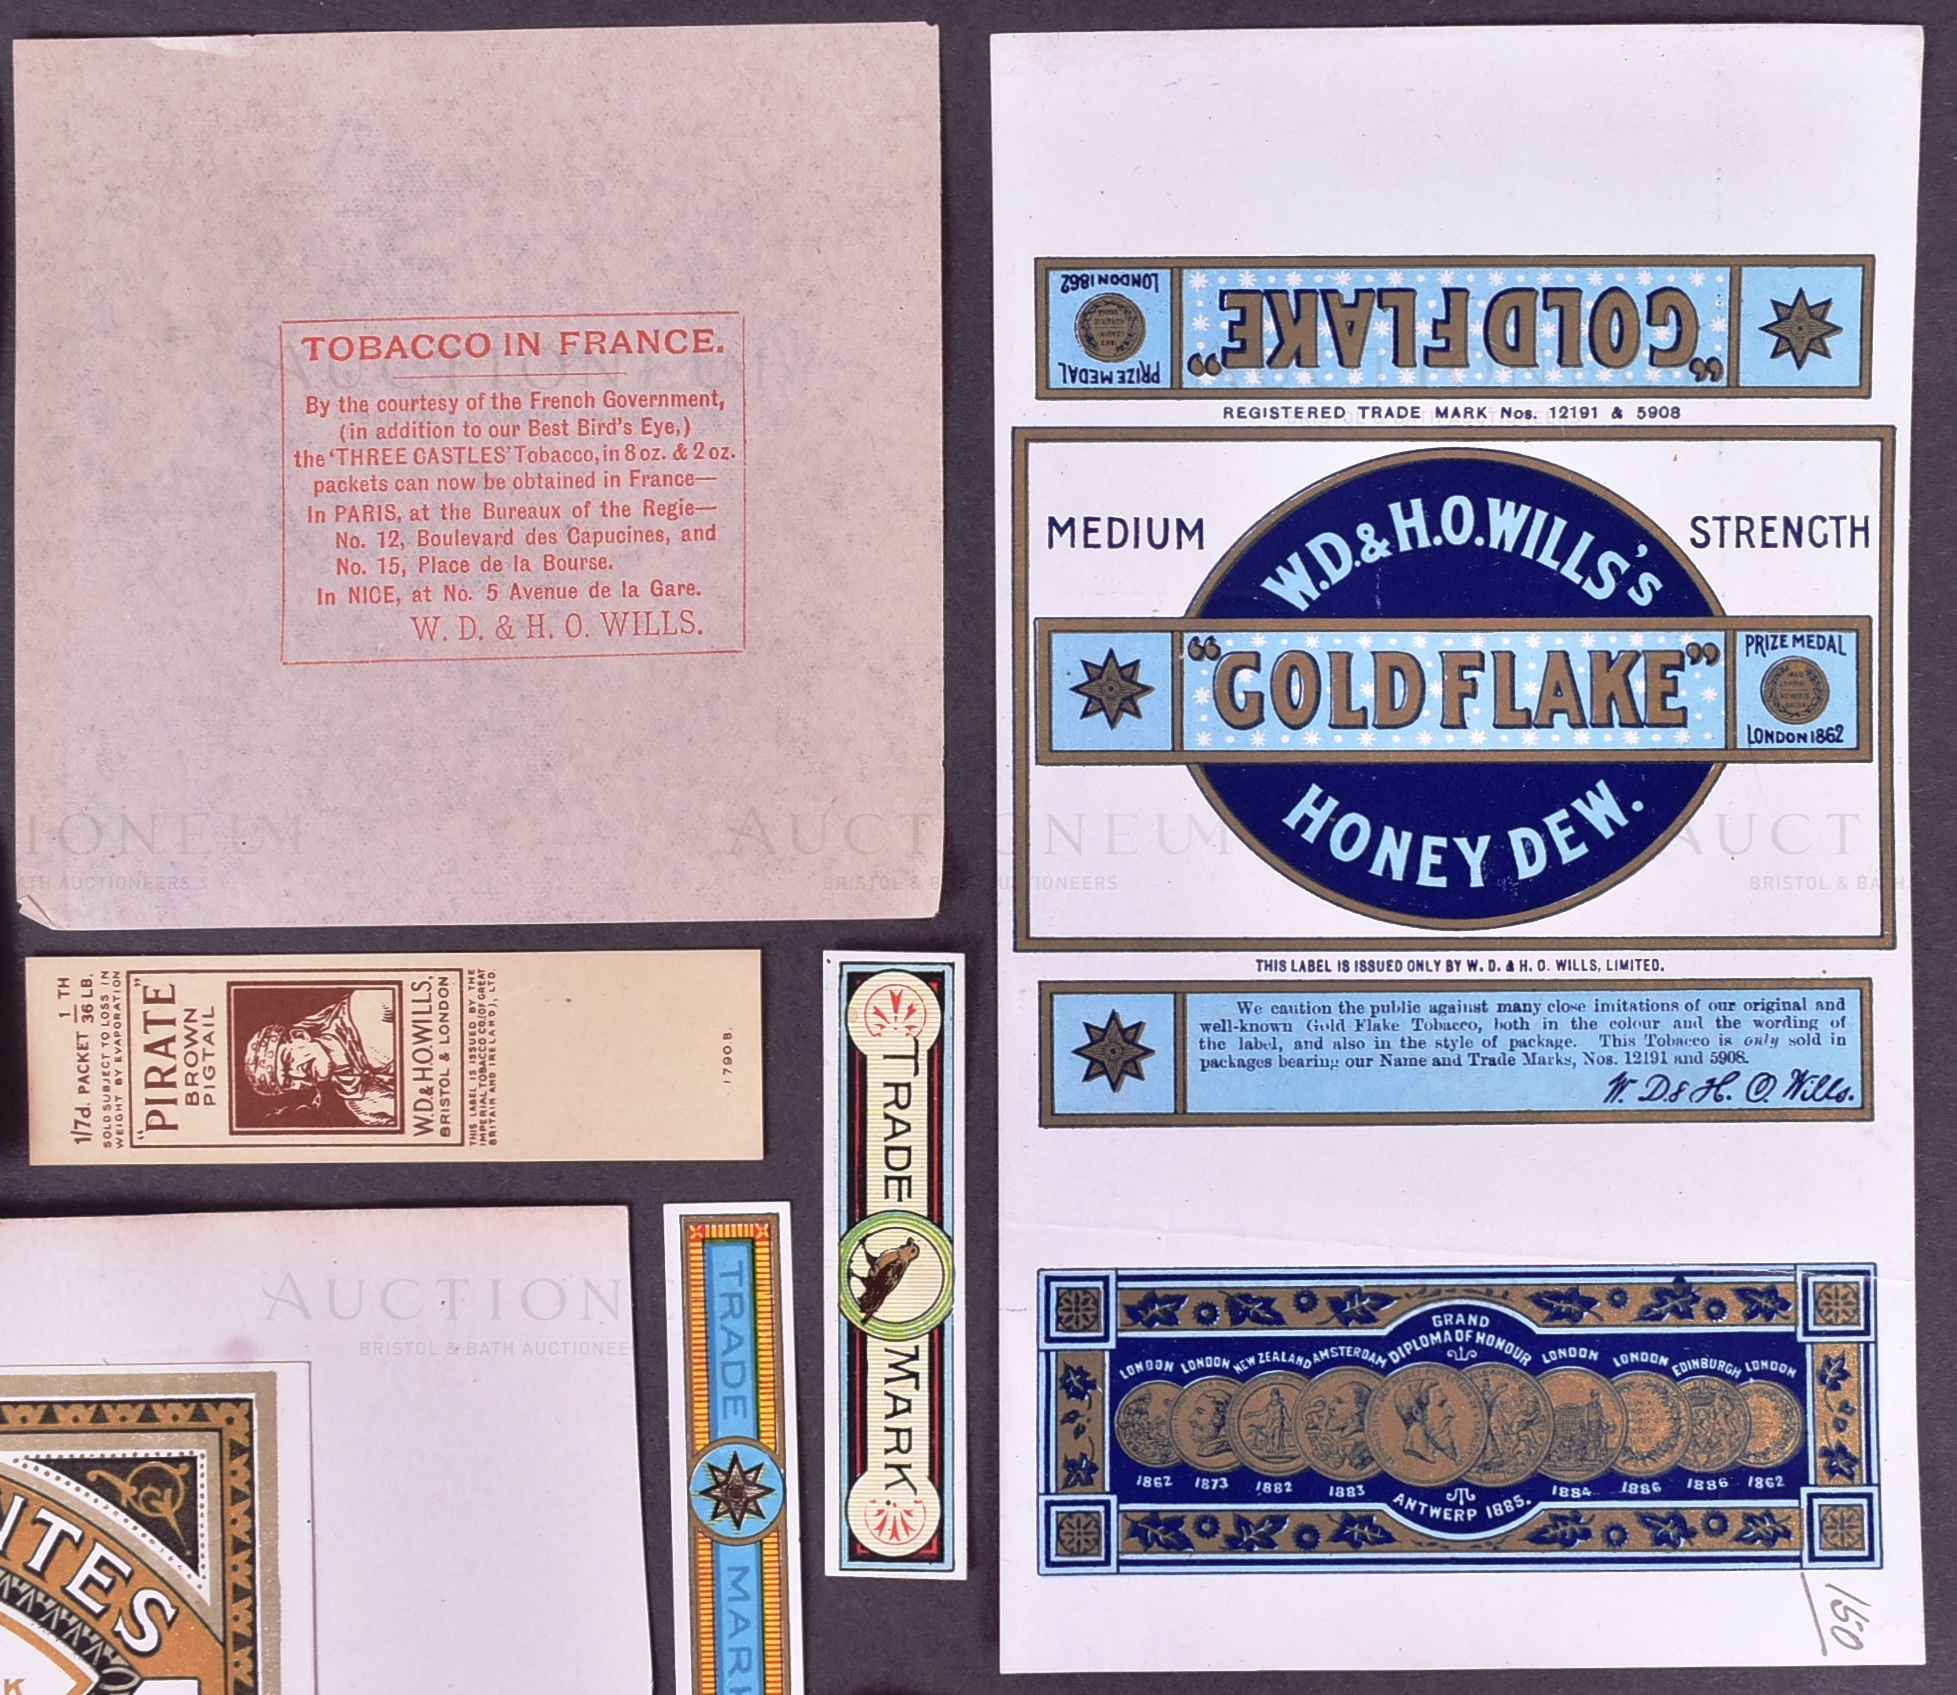 MARDON, SON & HALL - LATE 19TH / EARLY 20TH CENTURY CIGARETTE PACKET DESIGNS - Image 5 of 6